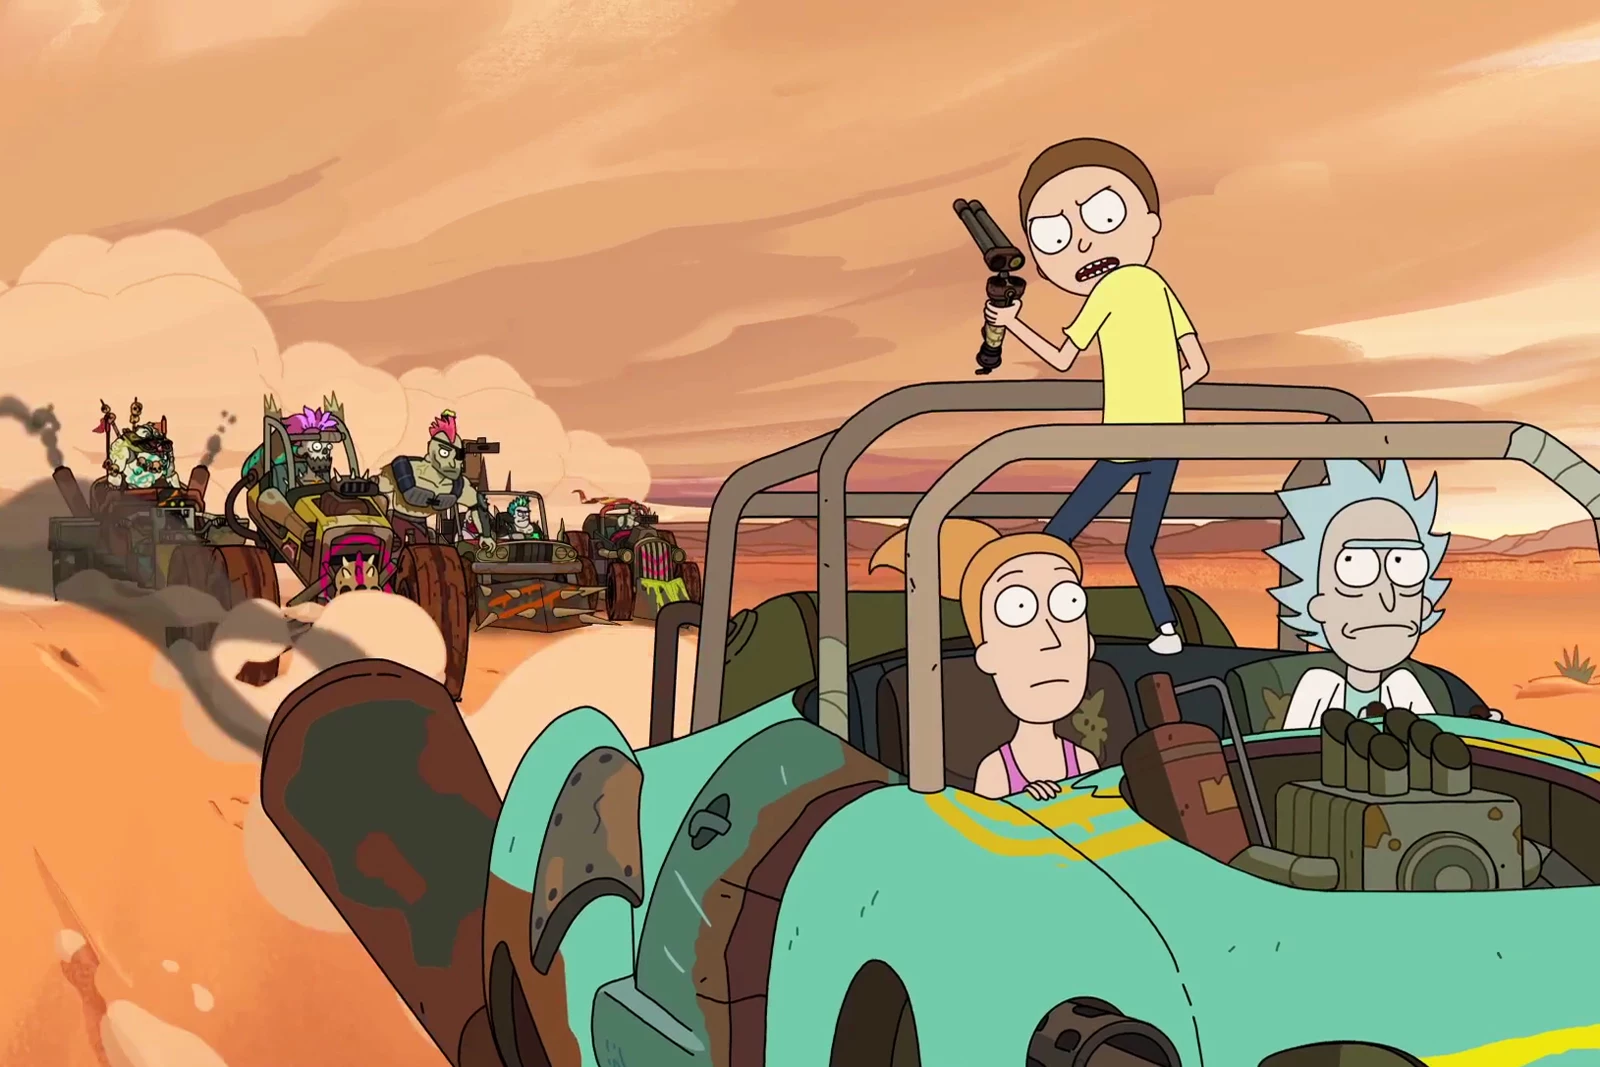 Rick and Morty s Pickle Rick Was Based on Breaking Bad